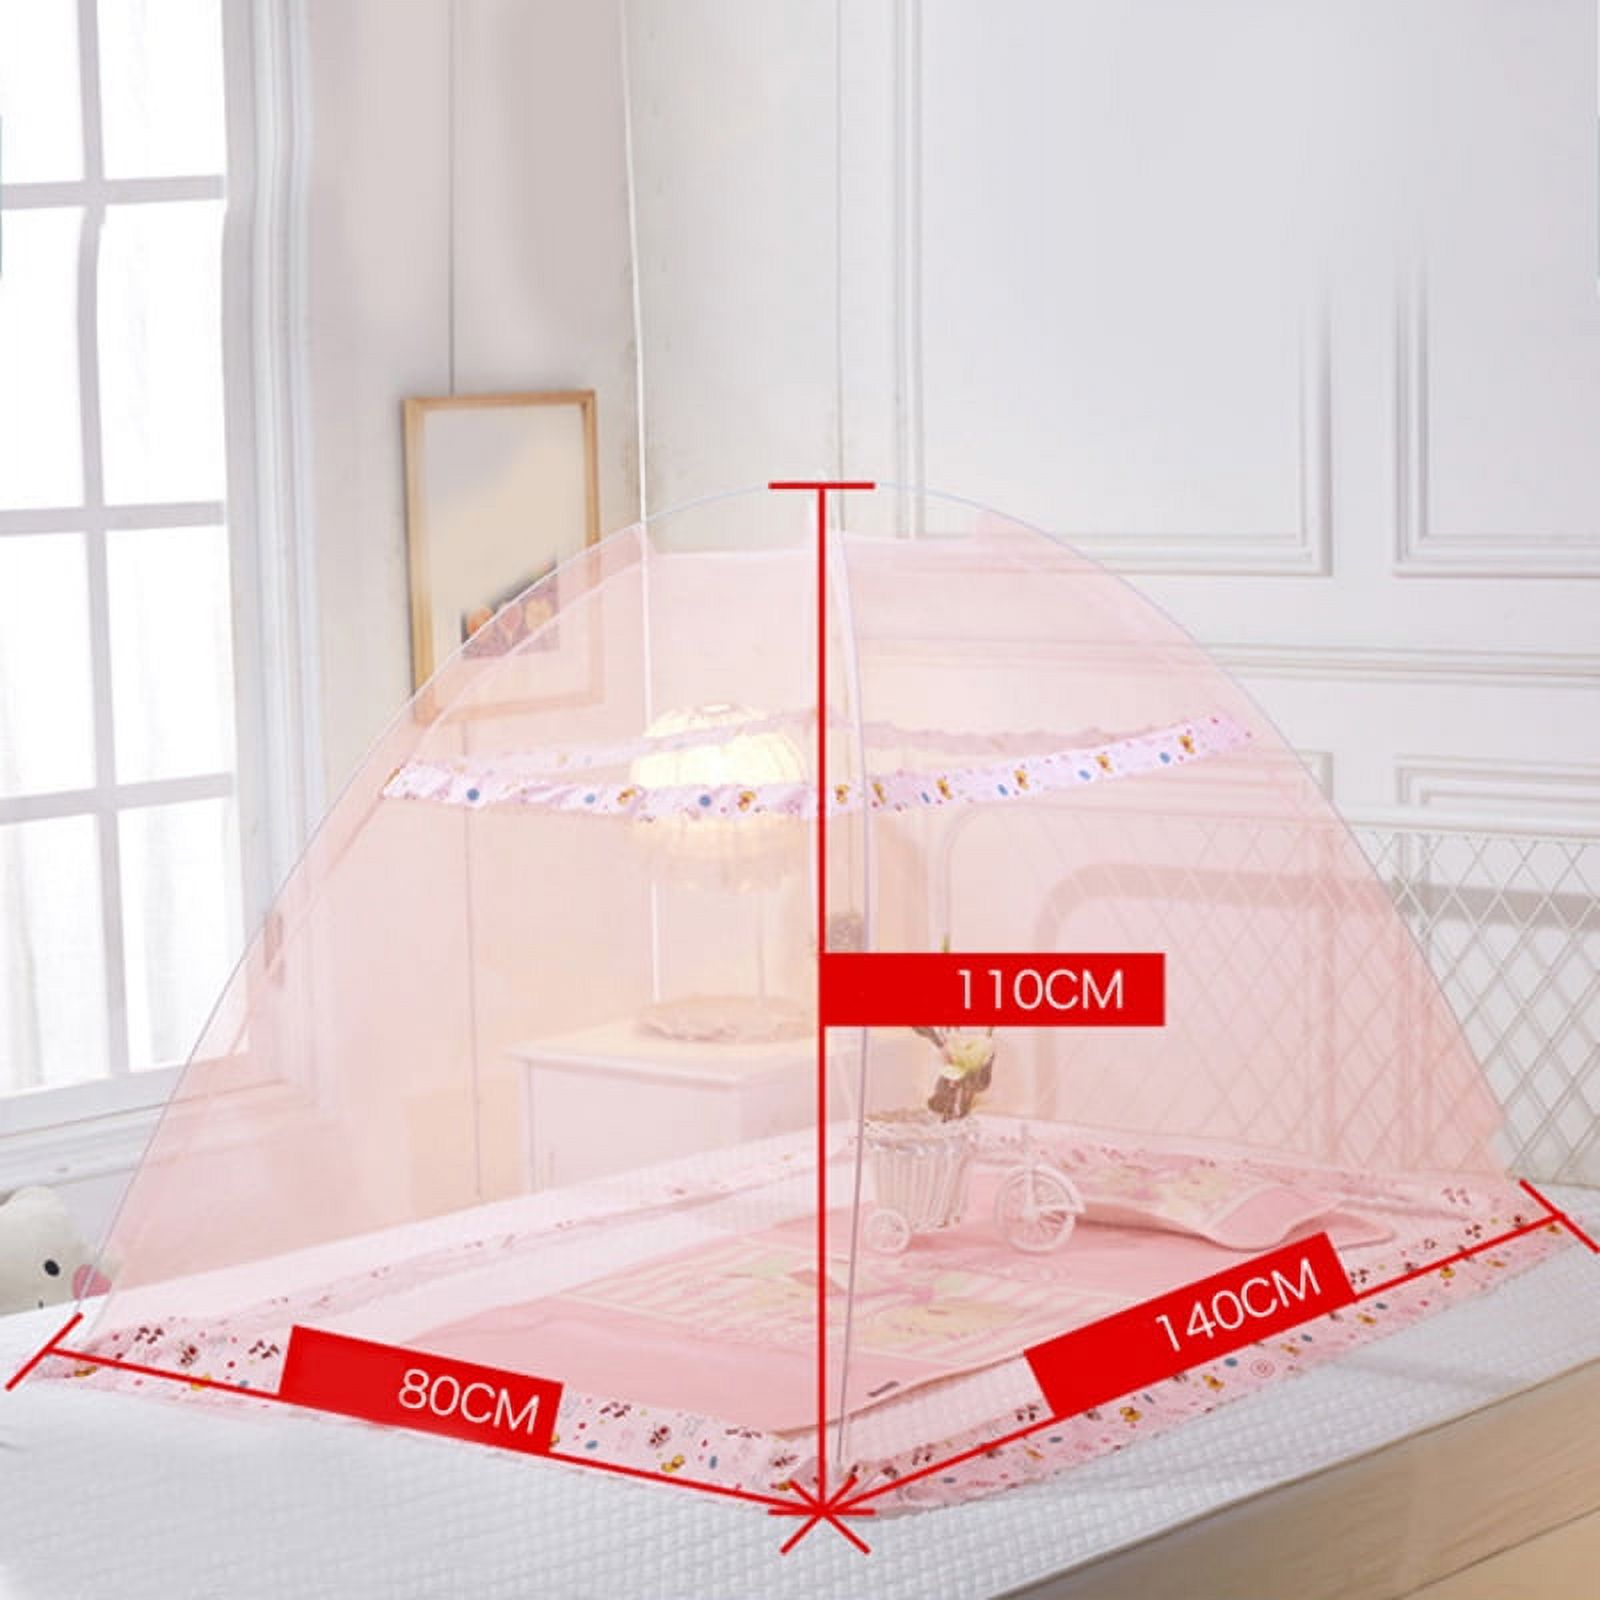 Portable Foldable Mosquito Nets Multifunction Bedroom Baby Kids Bed Nets;Portable Foldable Mosquito Nets Multifunction Bedroom Baby Kids Bed Nets - image 2 of 9